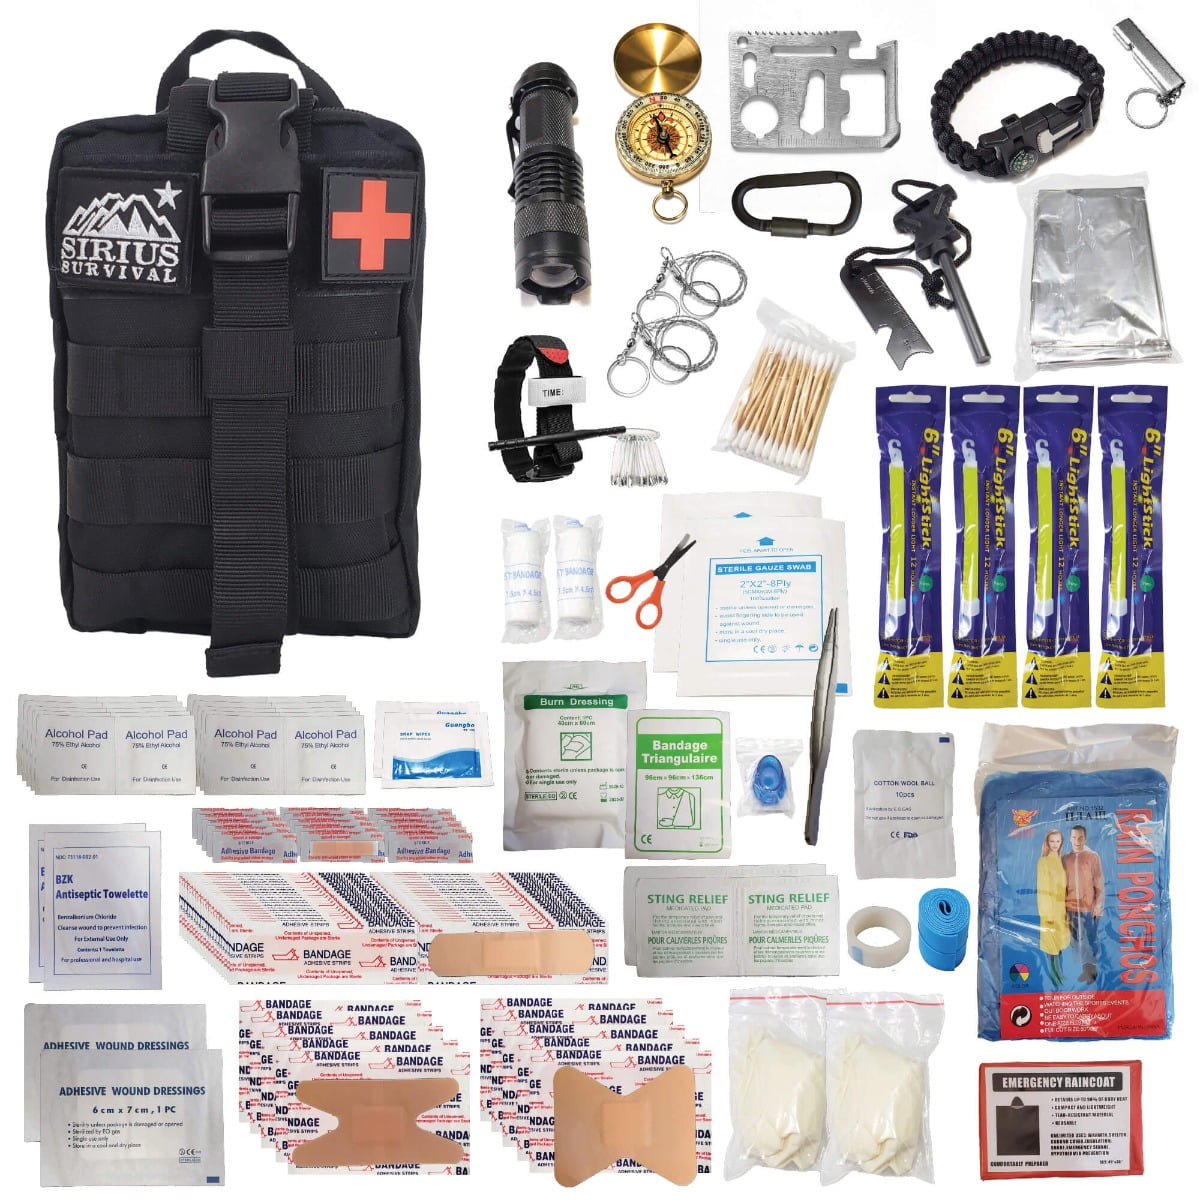 300 Pcs Compact First Aid Kits Car Emergency First Aid Supplies for Business Travel Survival Gear and Equipment Home First Aid Kit Essentials for